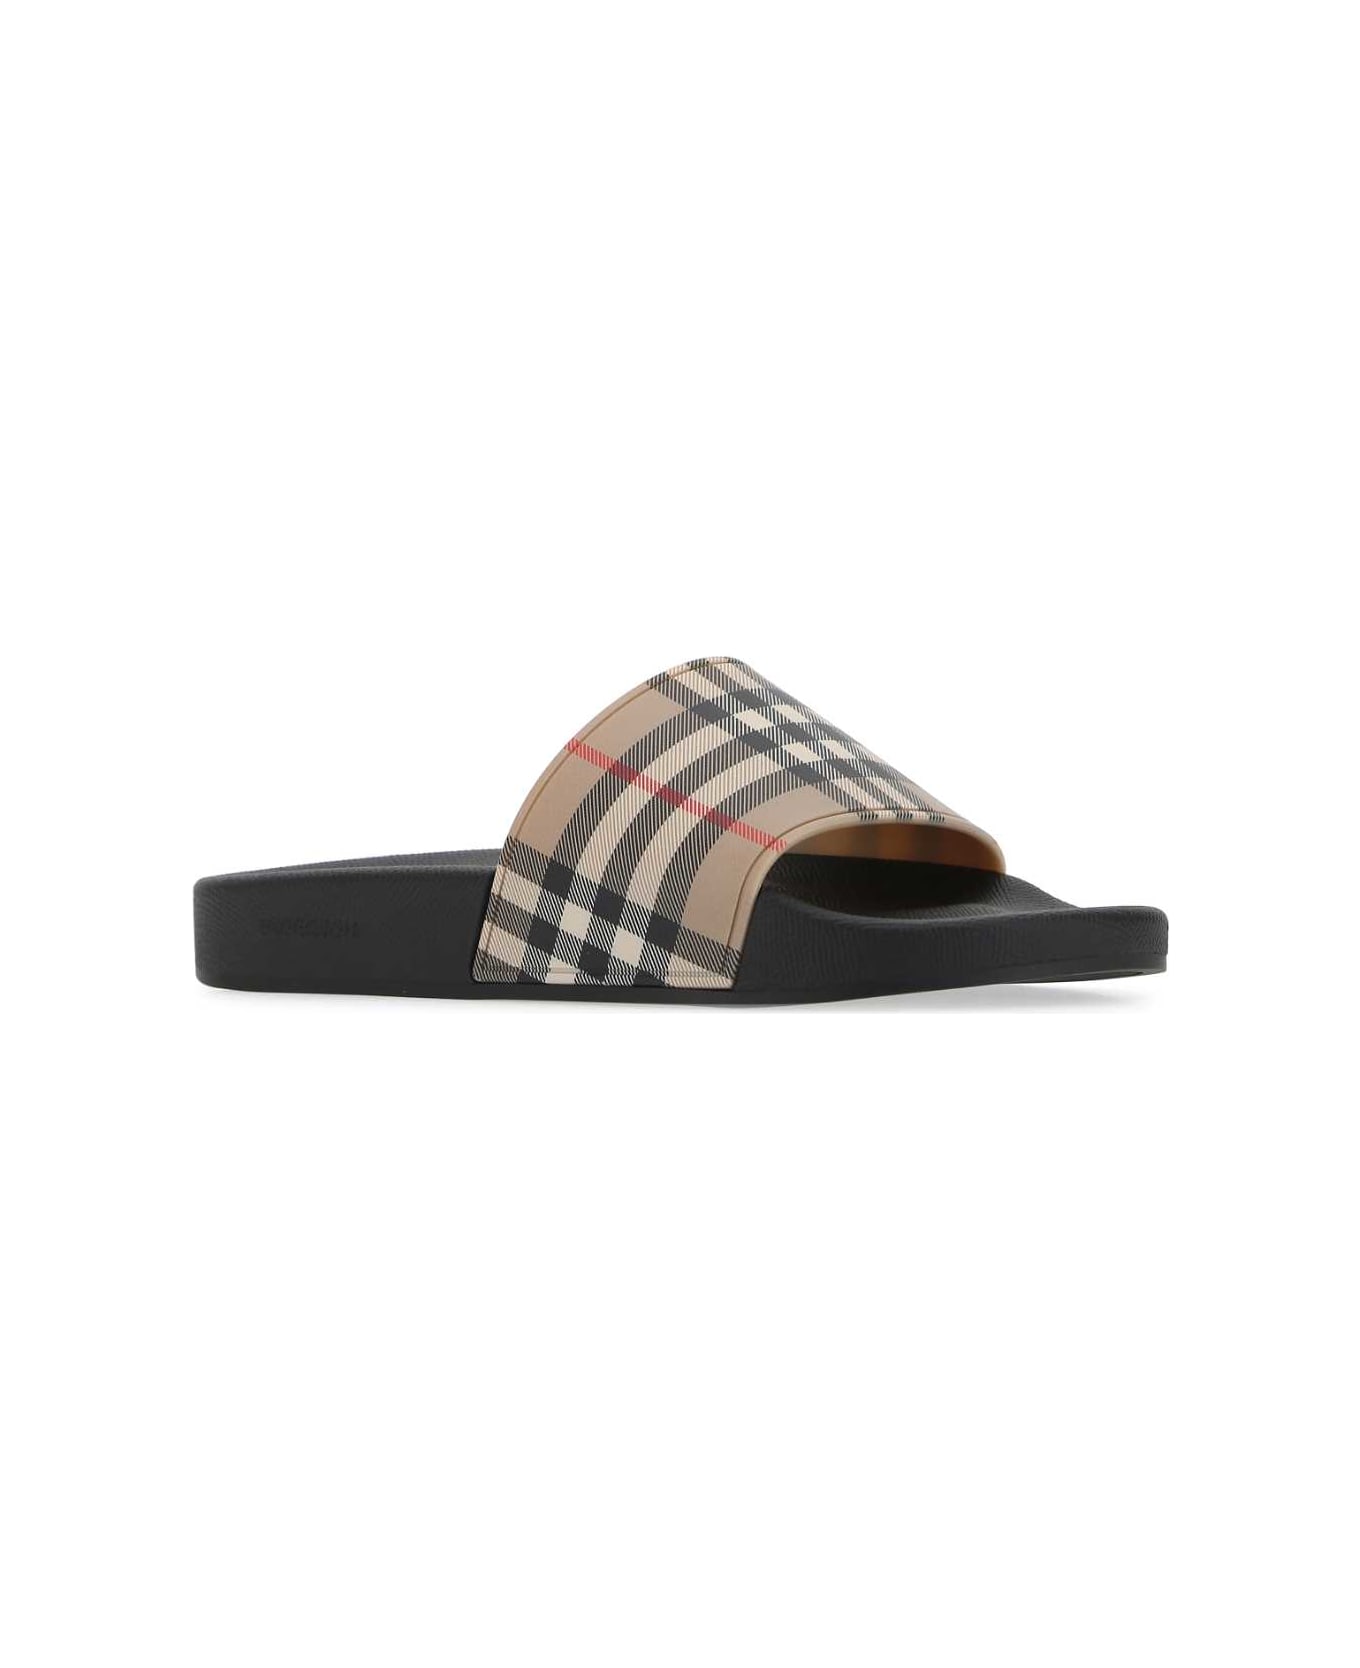 Burberry Printed Rubber Slippers - A7028